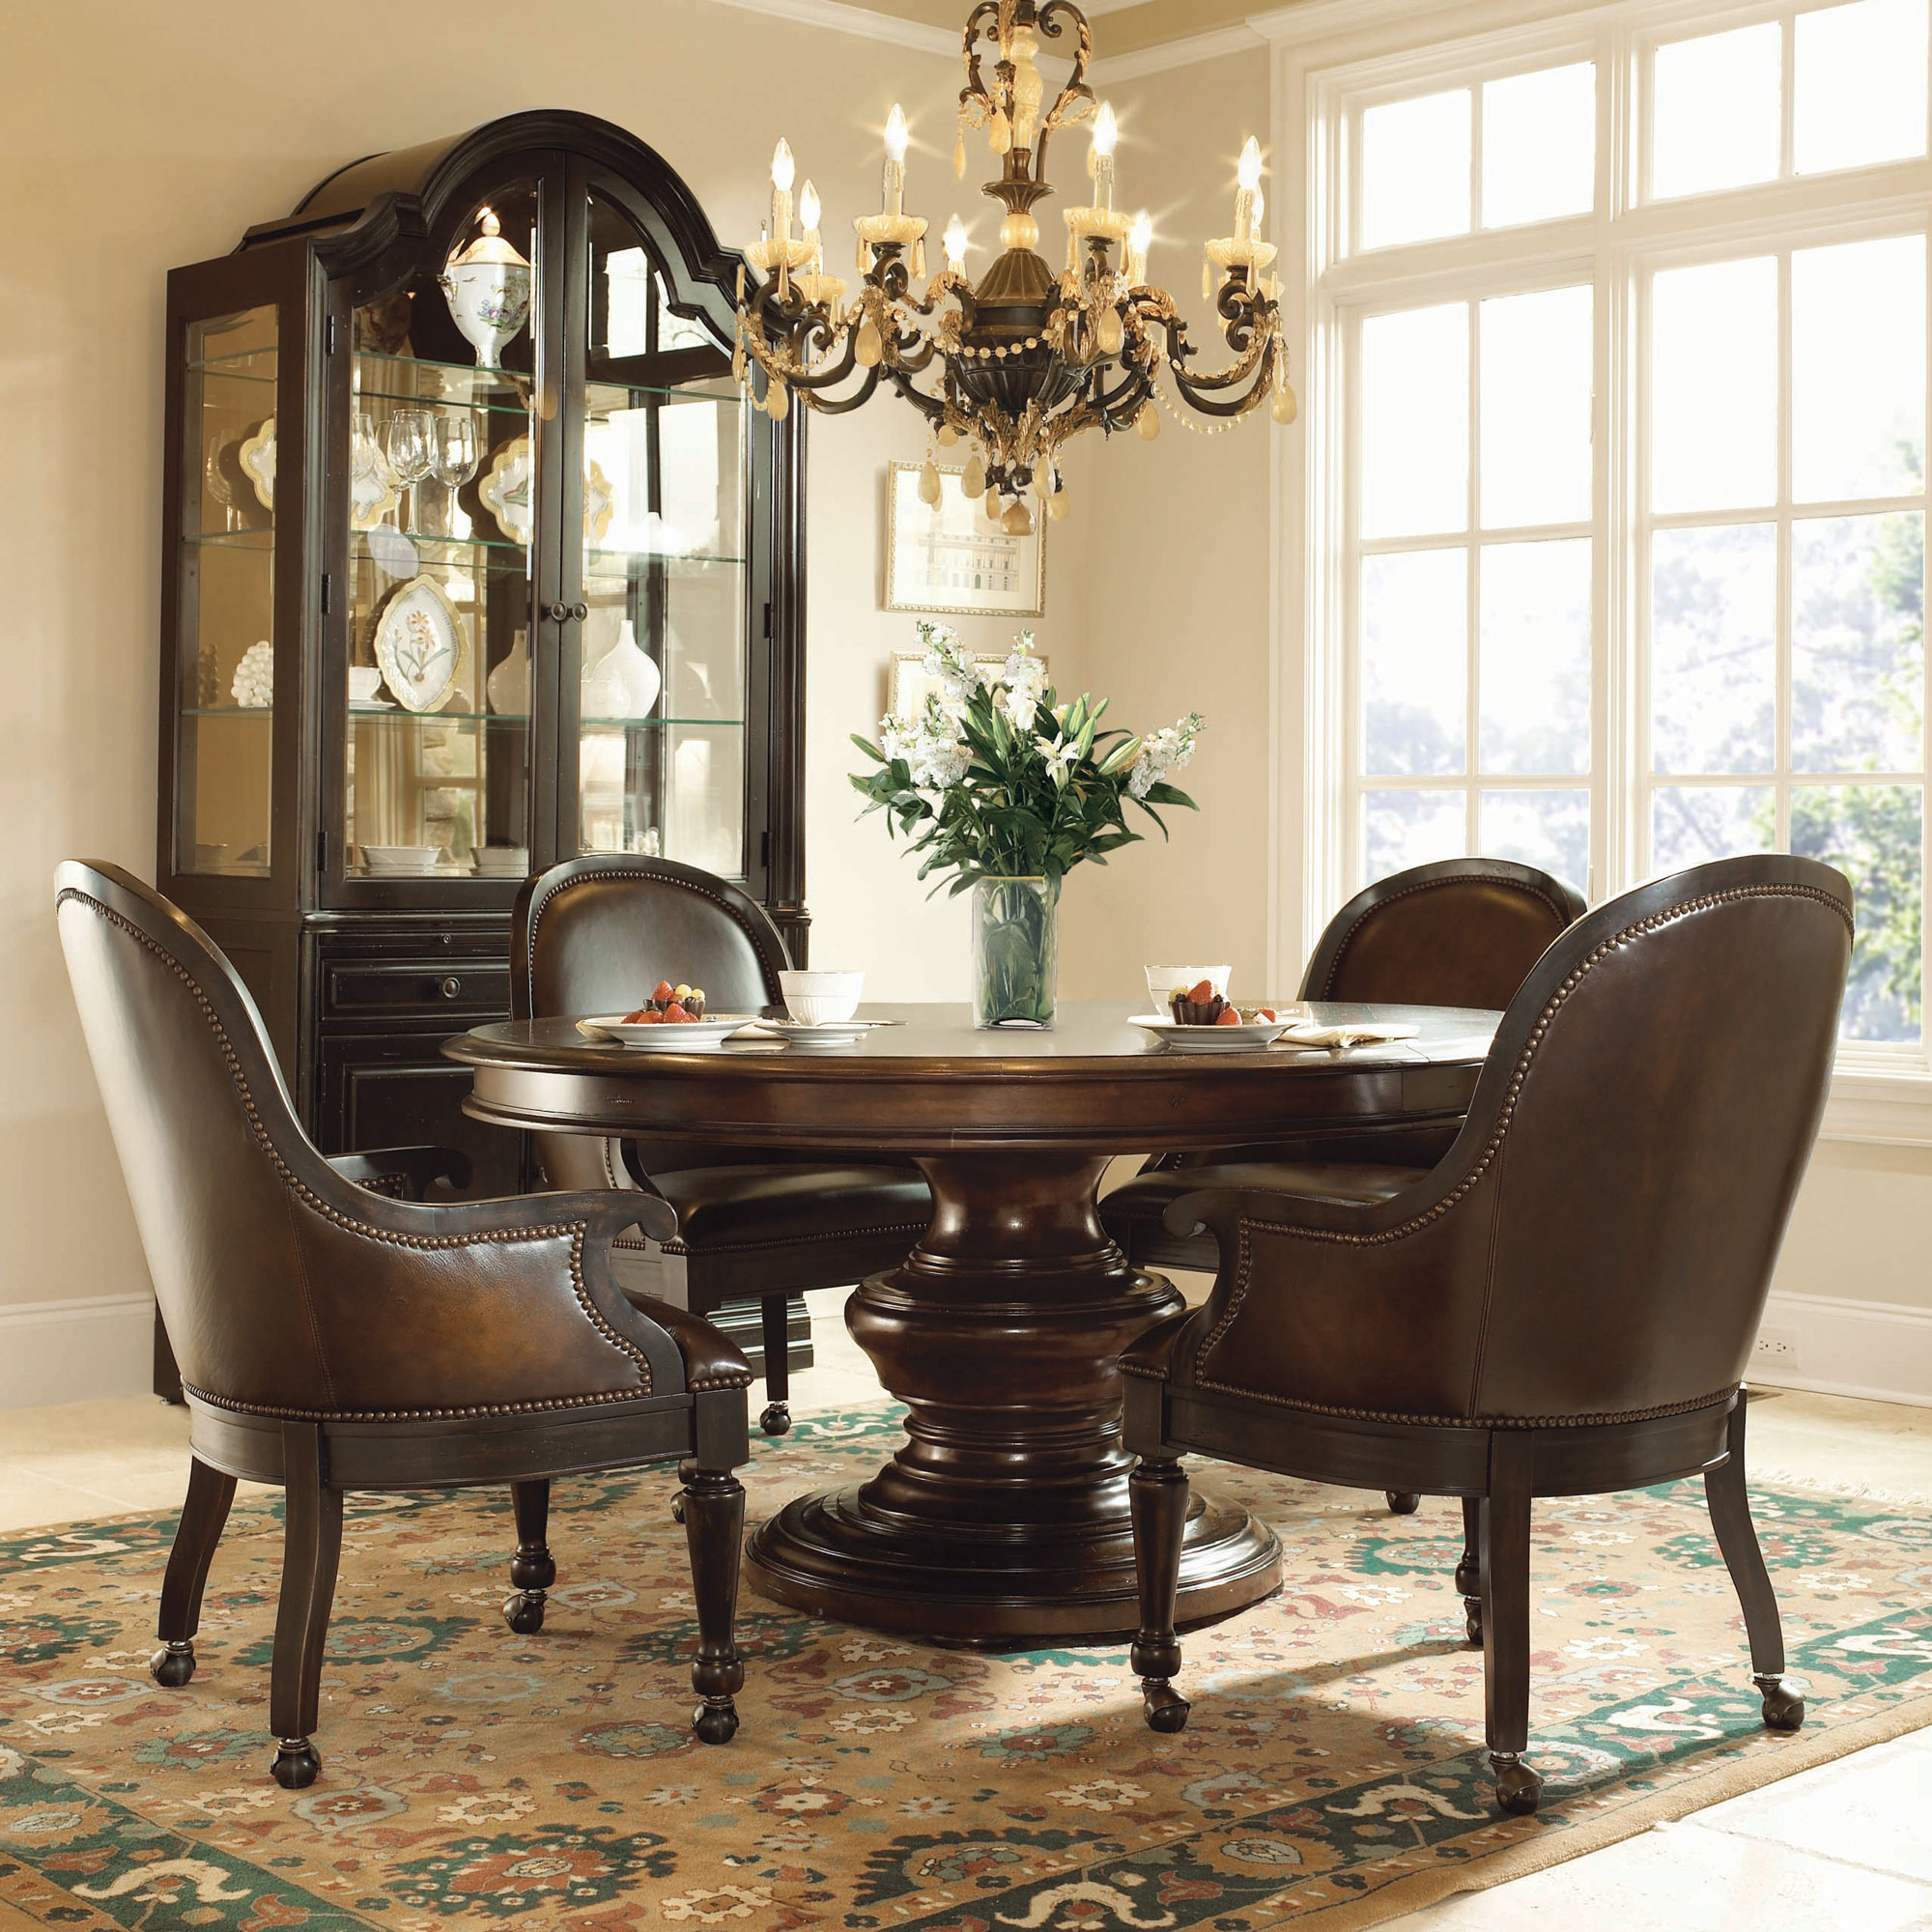 Round Dining Room Sets With Leaf Ideas On Foter